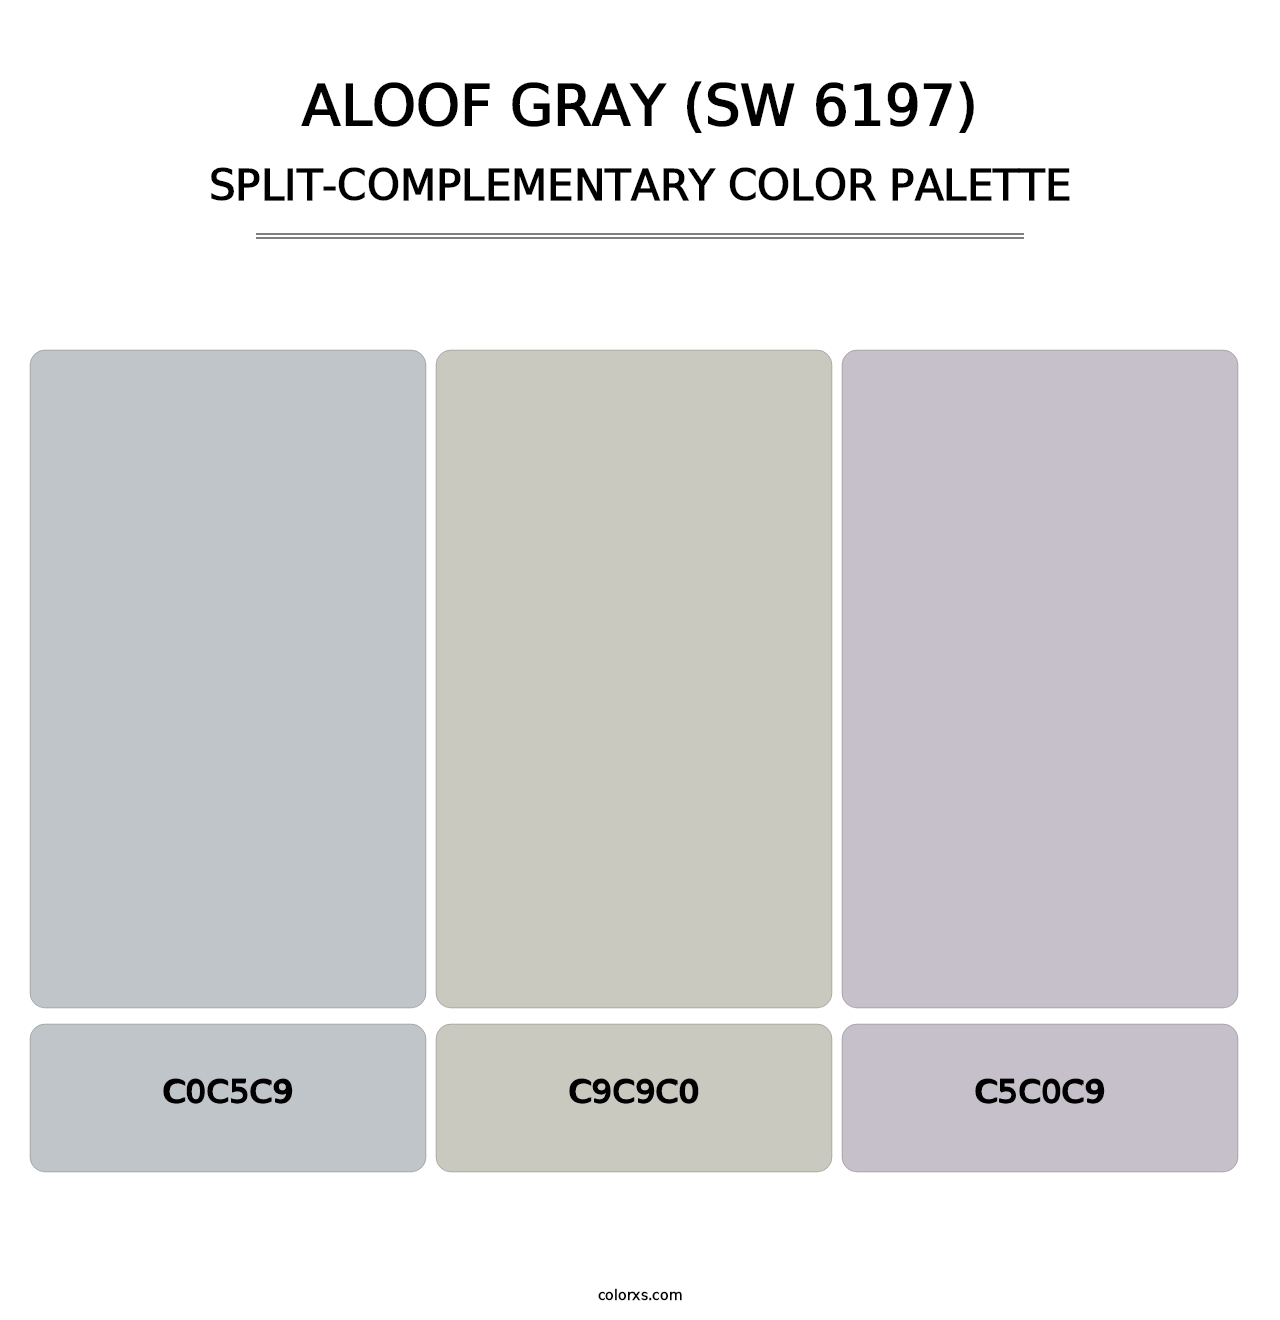 Aloof Gray (SW 6197) - Split-Complementary Color Palette